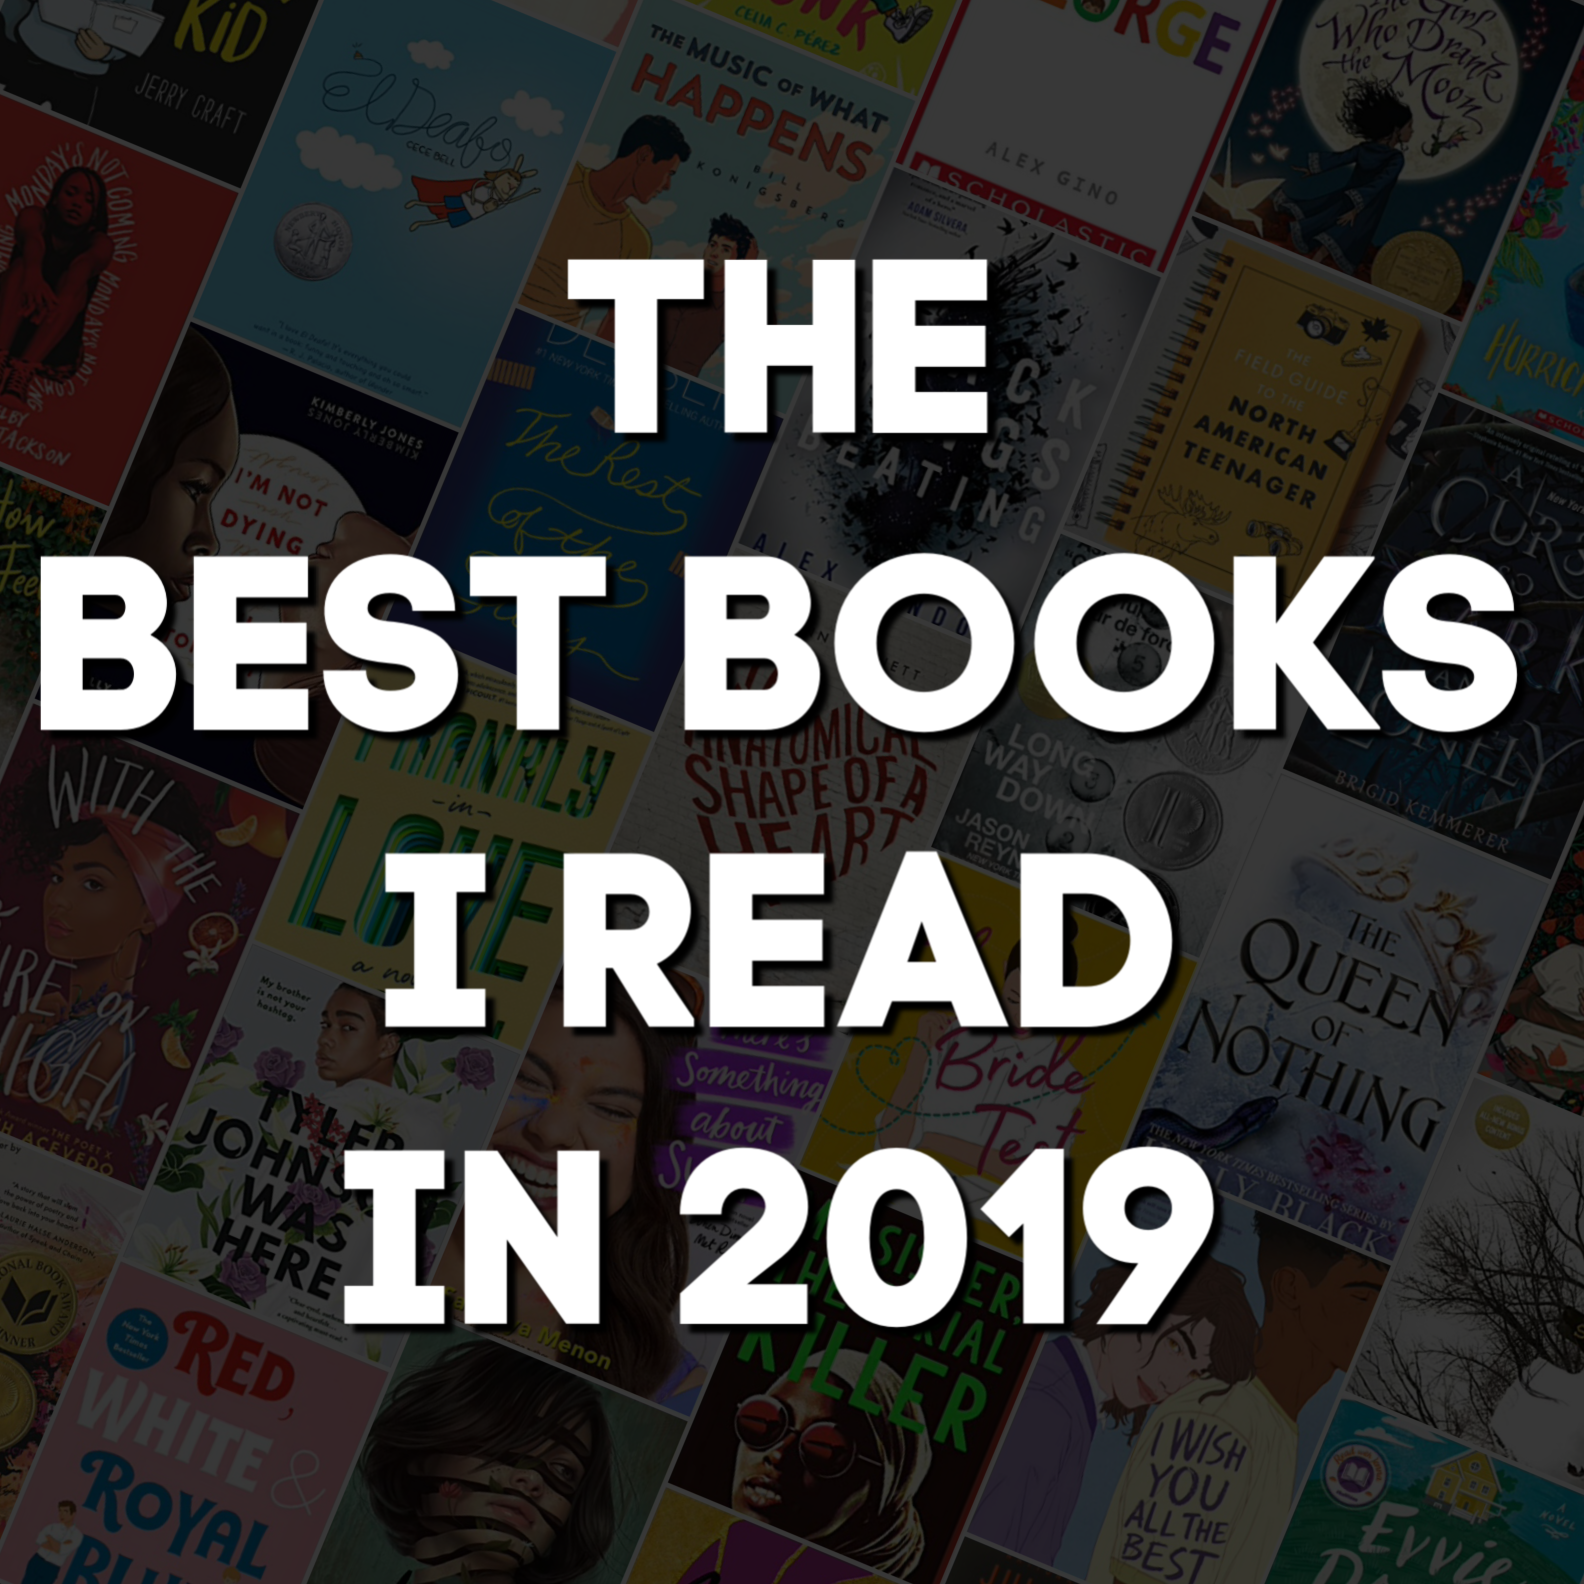 The Best Books I Read in 2019 by @letmestart including books for kids, teens, and adults